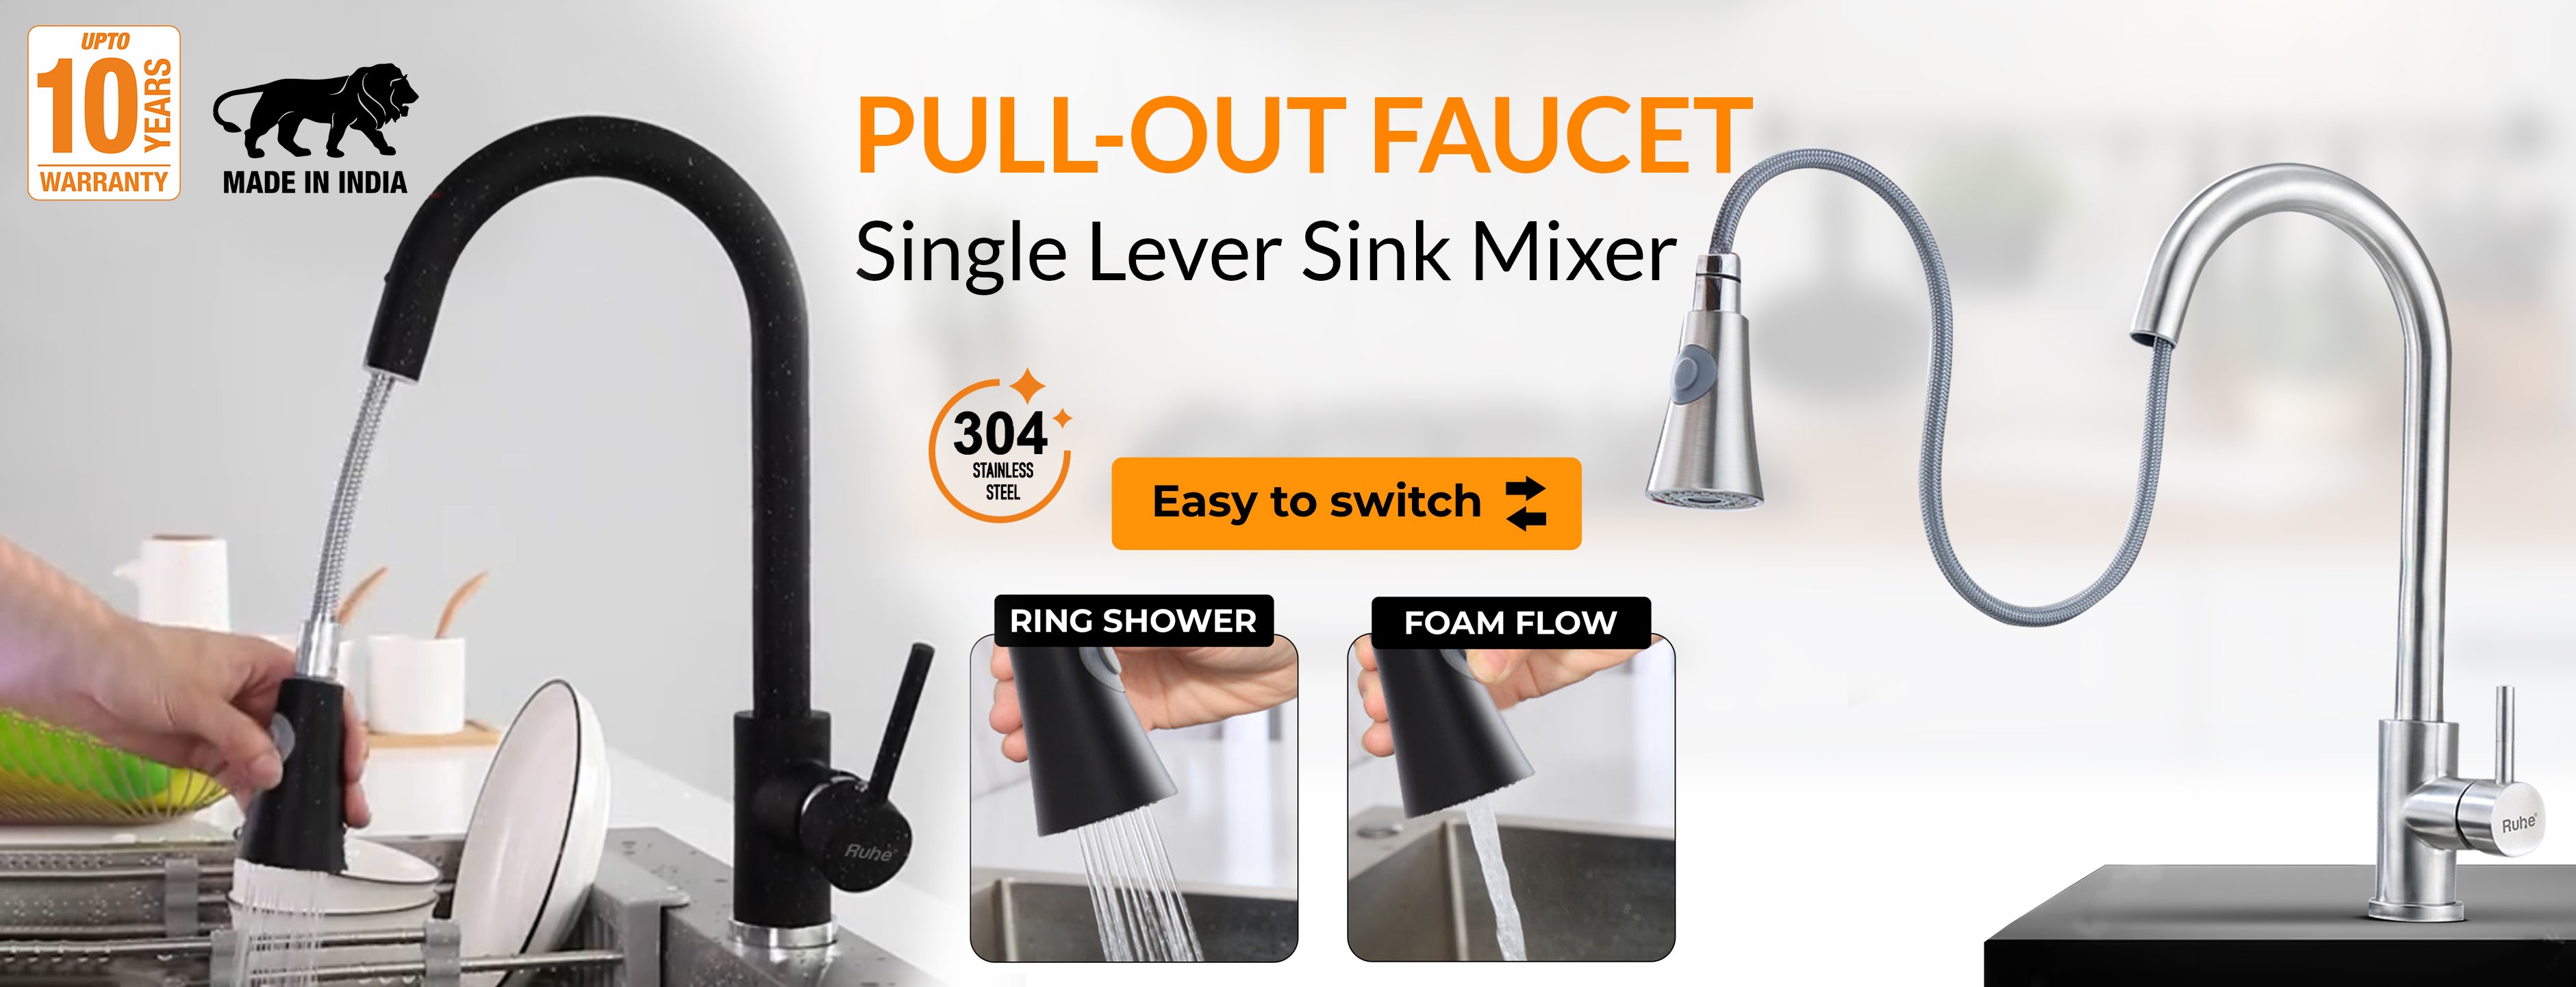 New Website banner pull down faucet 2